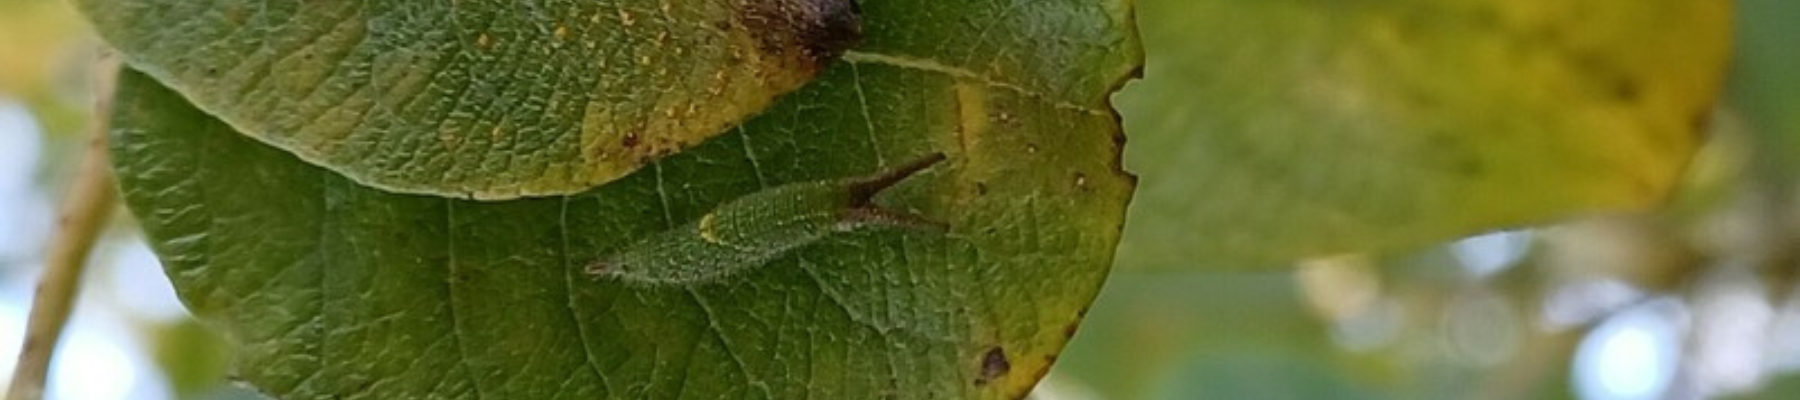 A caterpillar of the purple emperor butterfly on a goat willow leaf